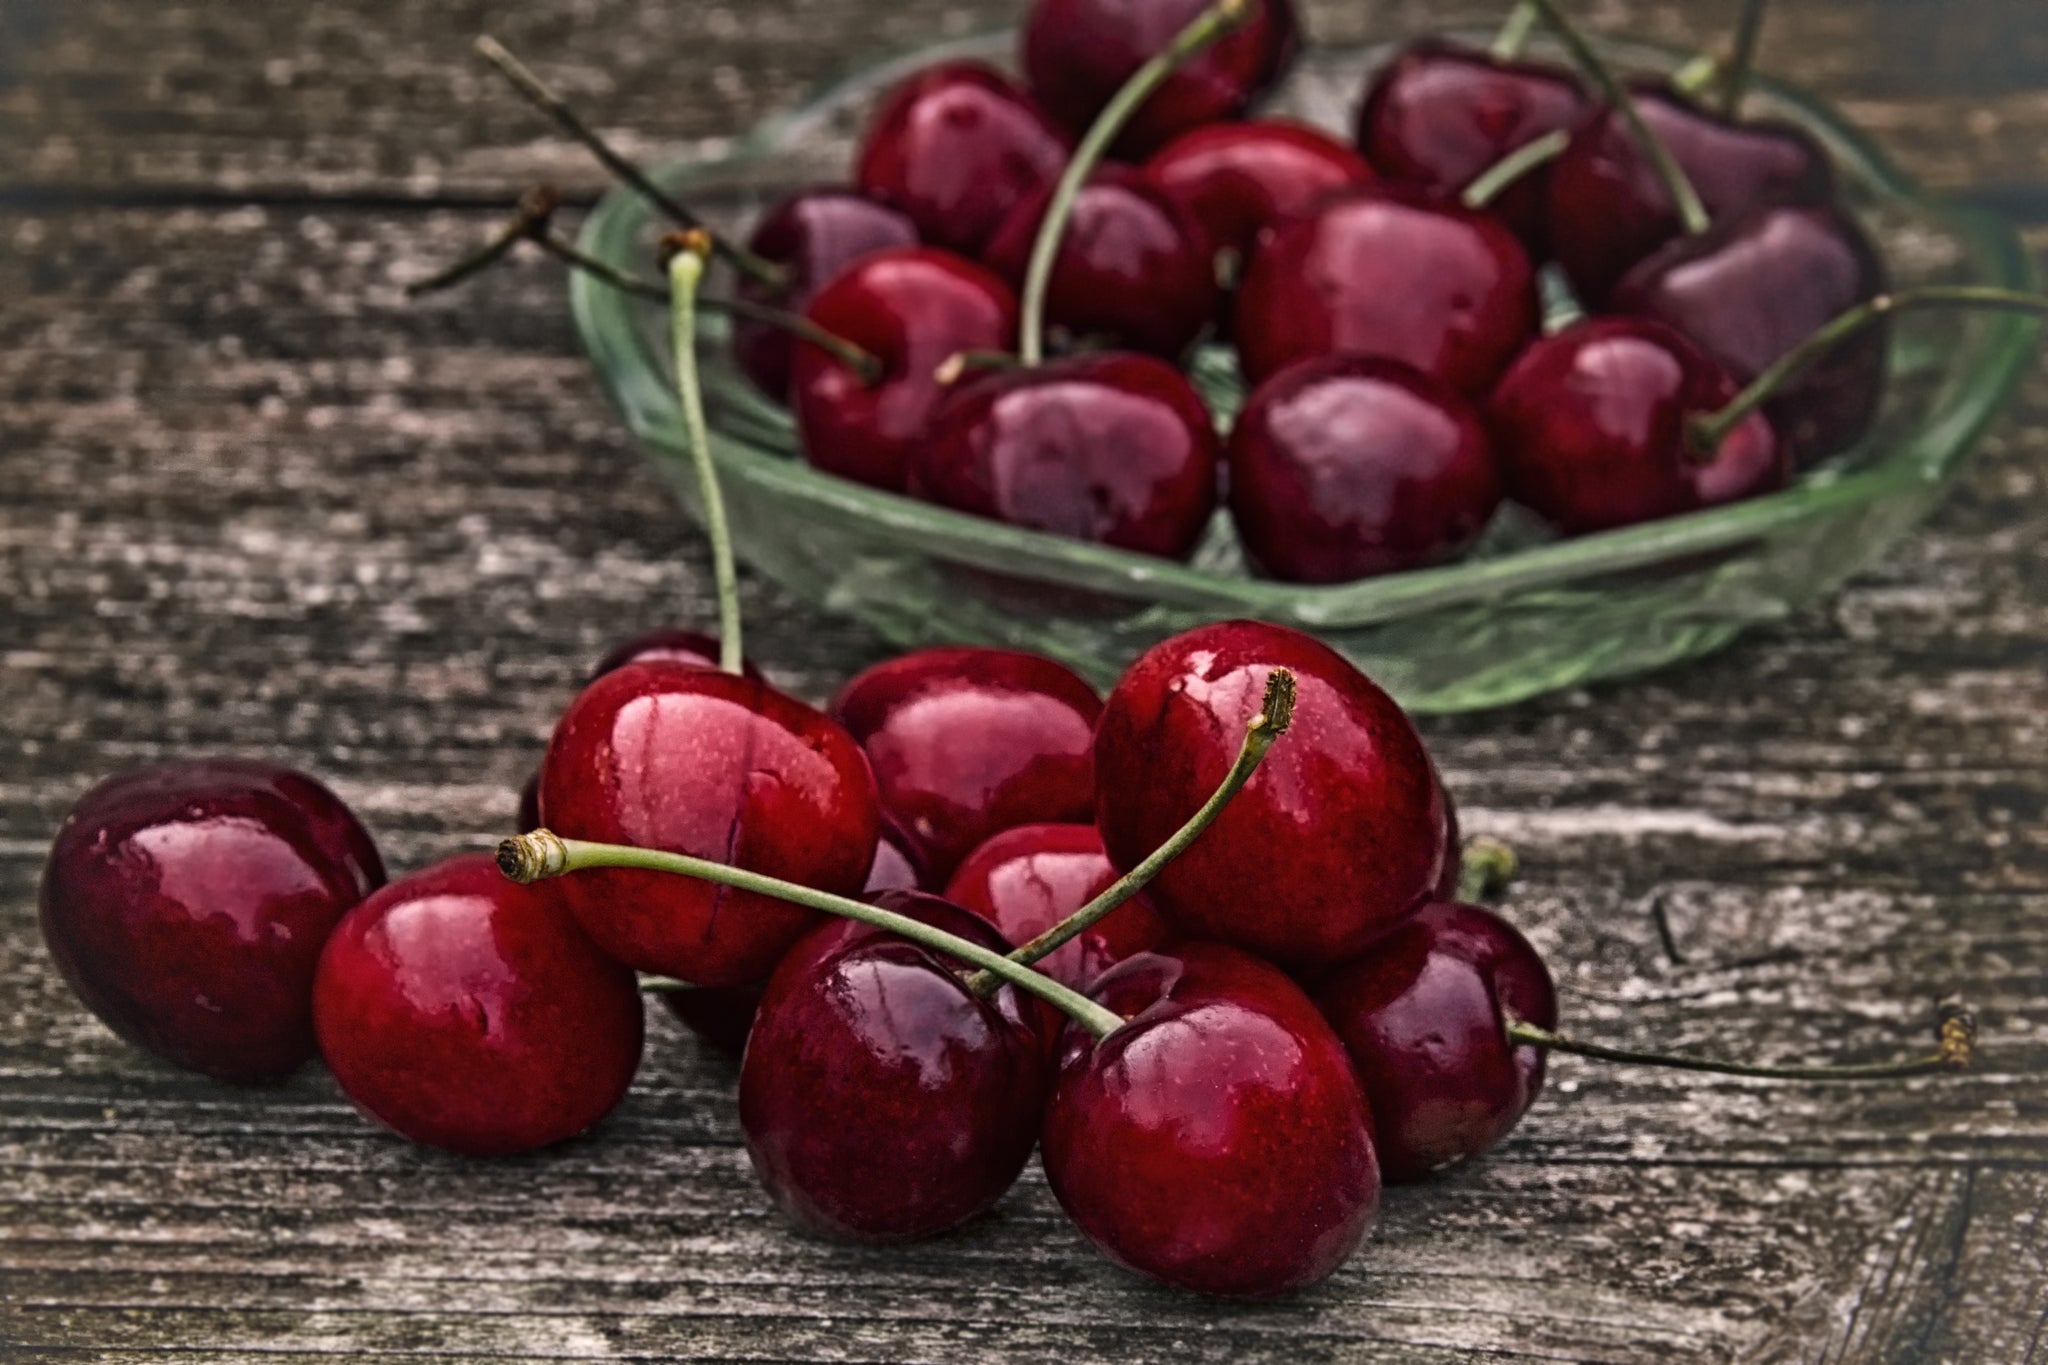 Bing Cherries: A Natural Health Remedy that Grows on Trees?